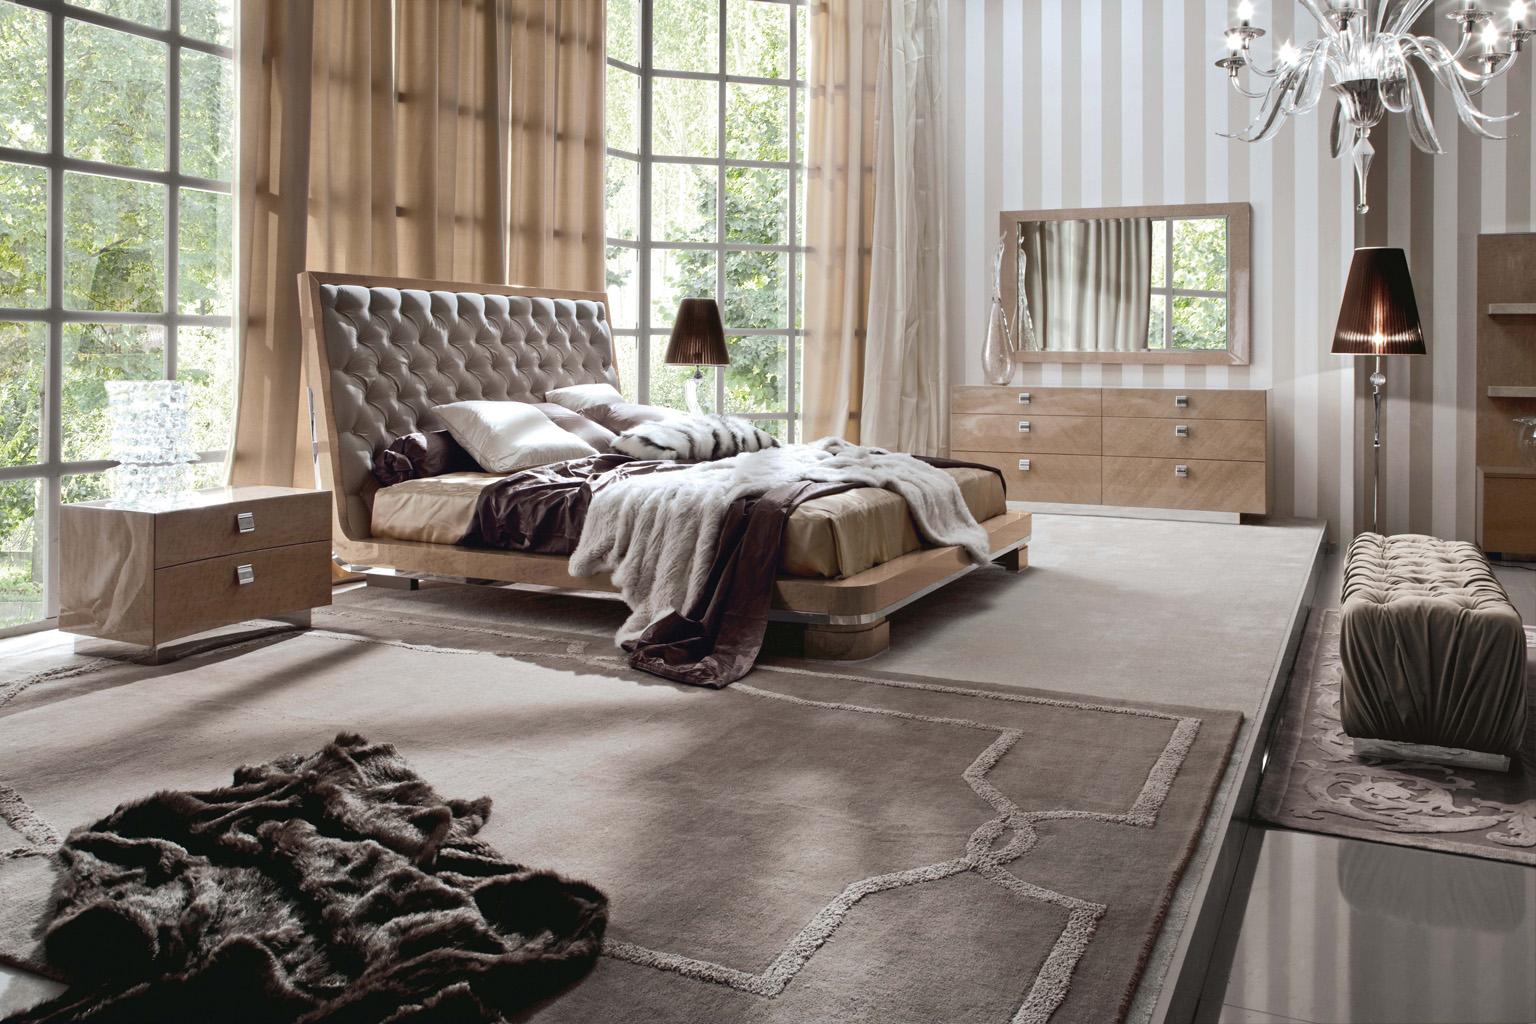 Giorgio Collection Tufted Upholstered Leather Headboard King Bed Sunrise Neuf - En vente à New York, NY